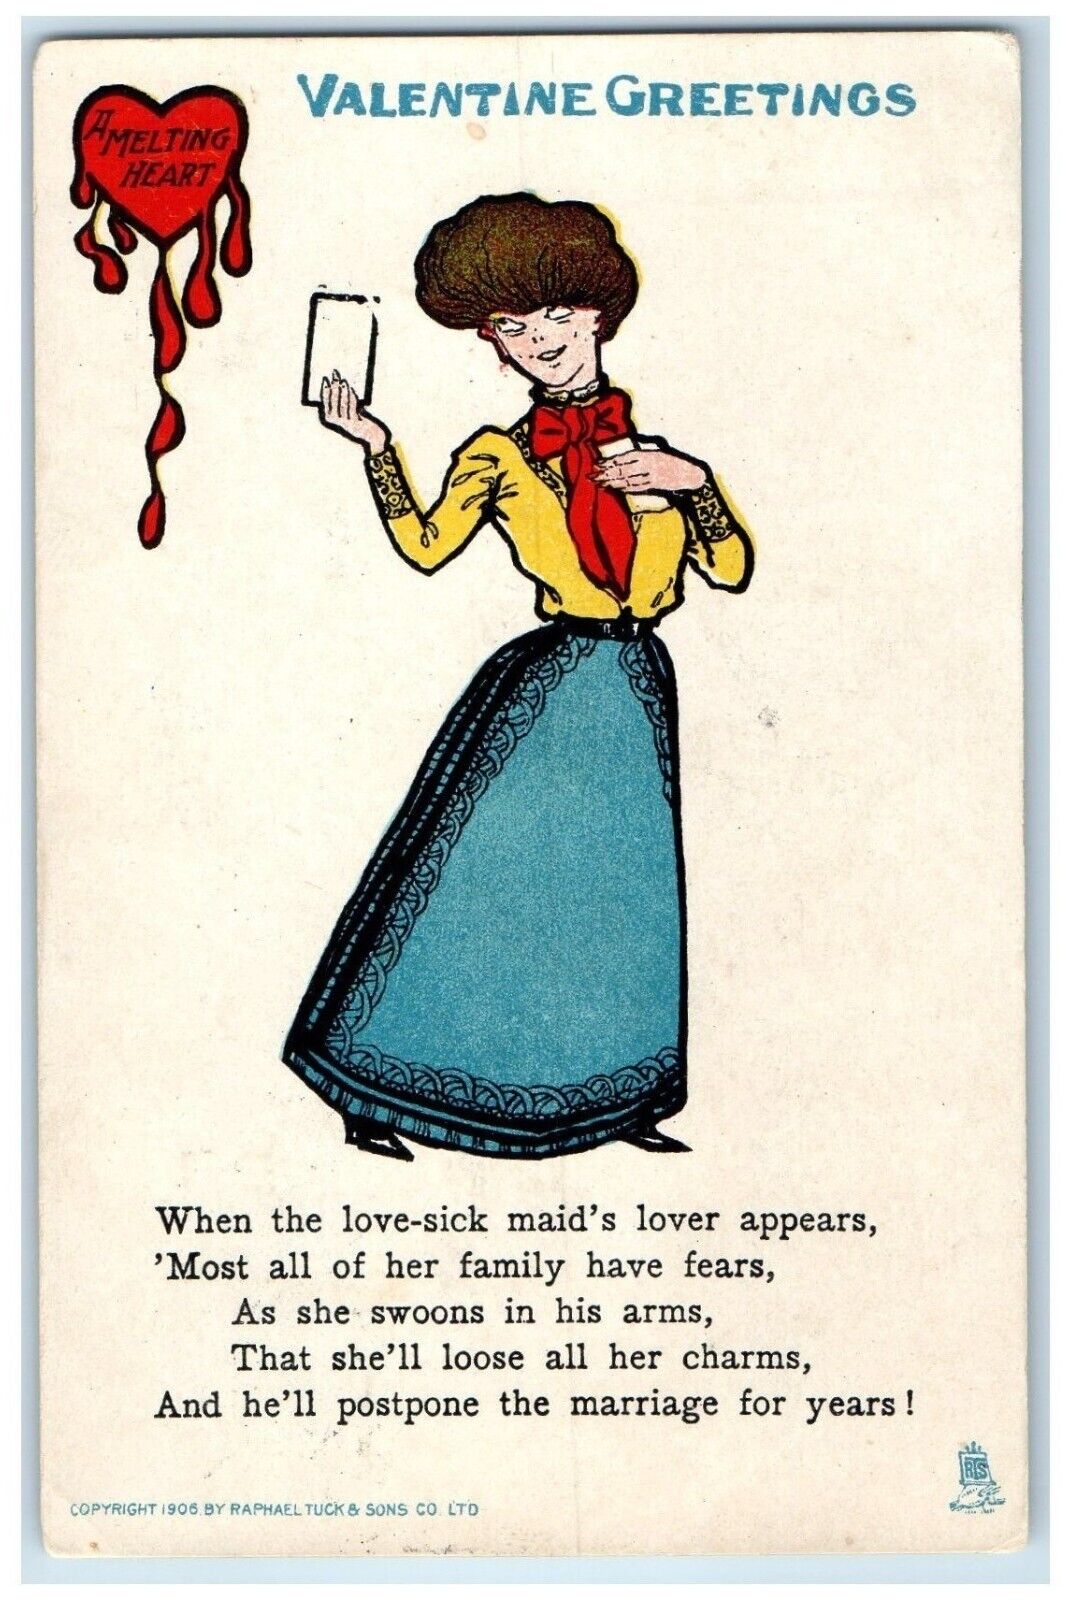 1907 Valentine Greetings Woman Melting Heart Tuck's New York NY Antique Postcard